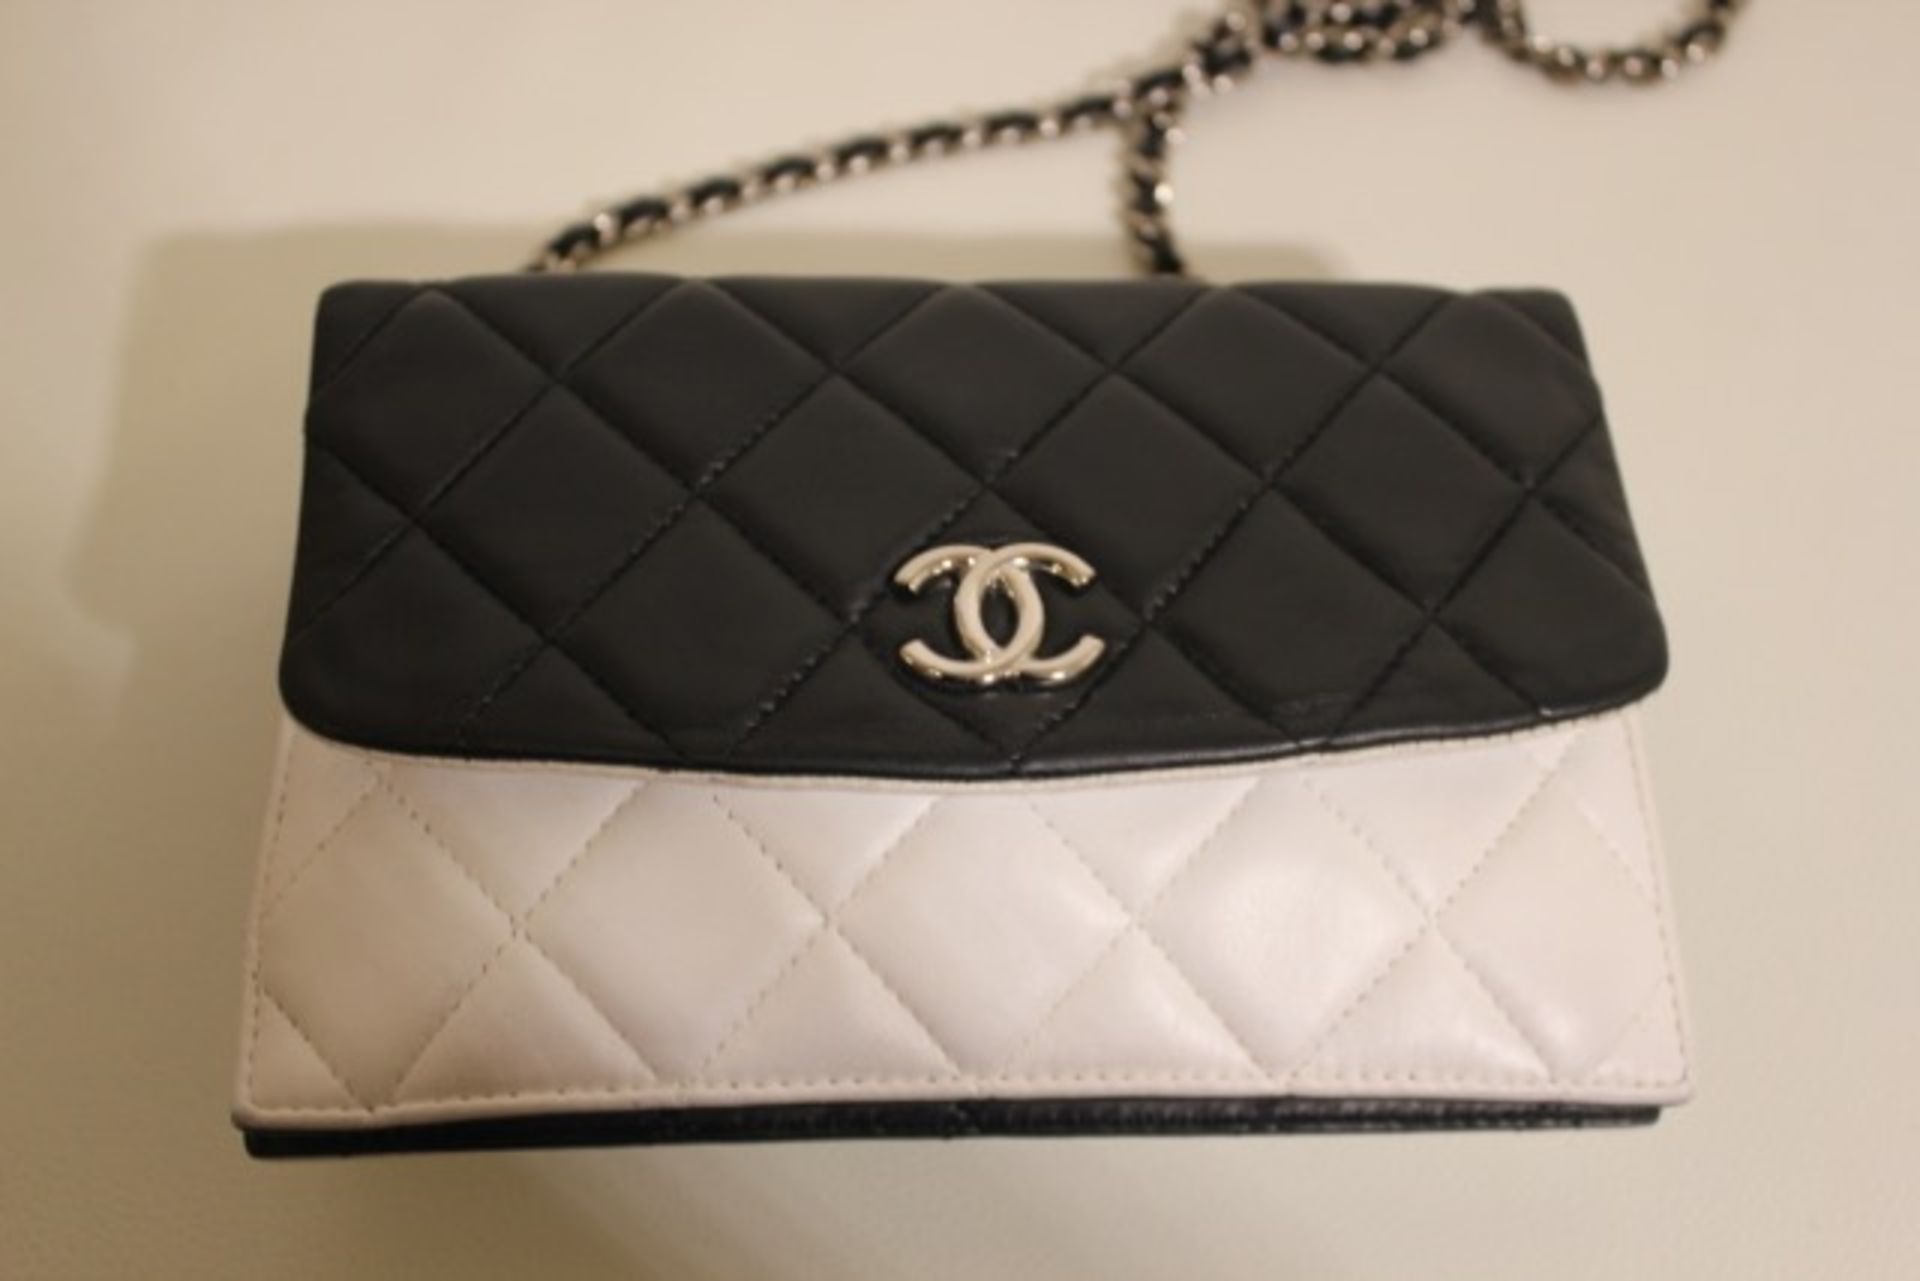 CHANEL - WOC - Black and White Lambskin